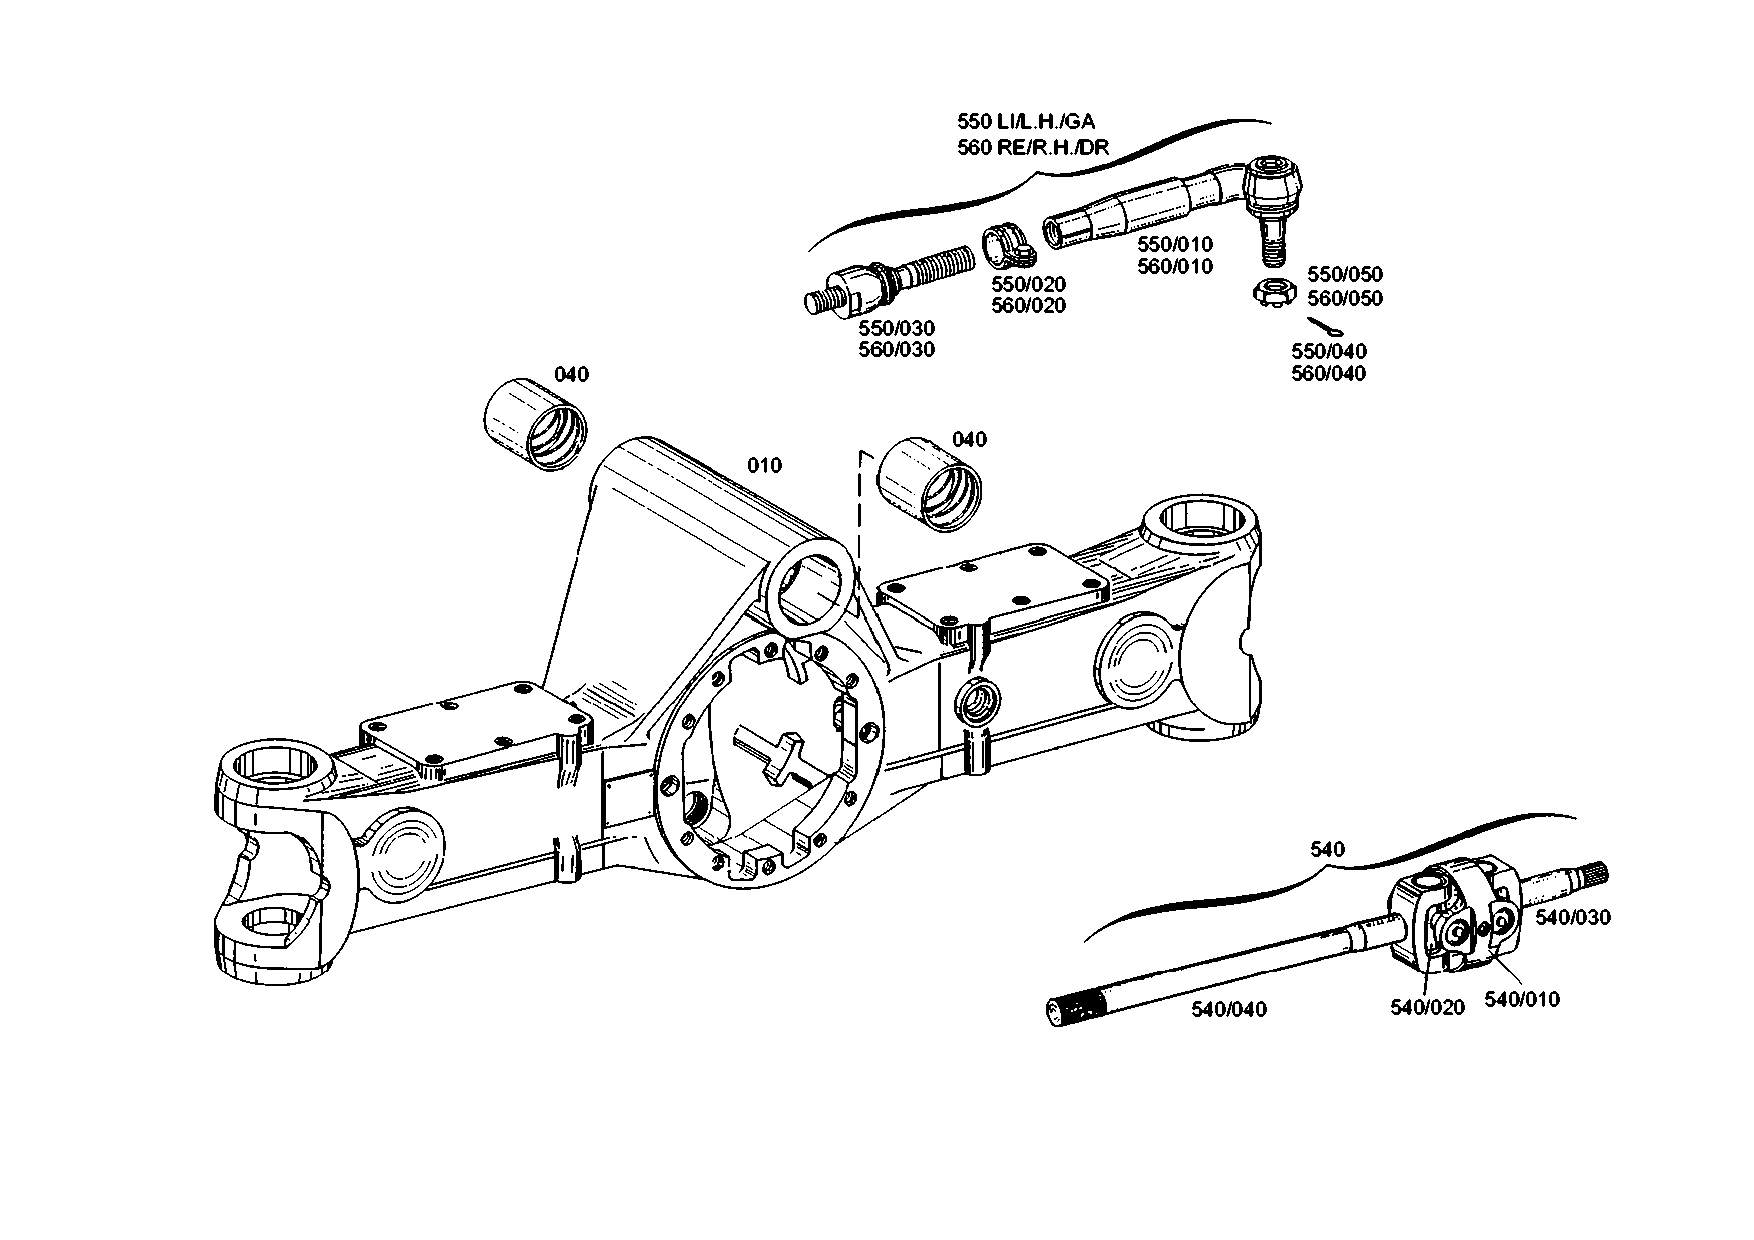 drawing for LIEBHERR GMBH 10216559 - TIE ROD (figure 4)